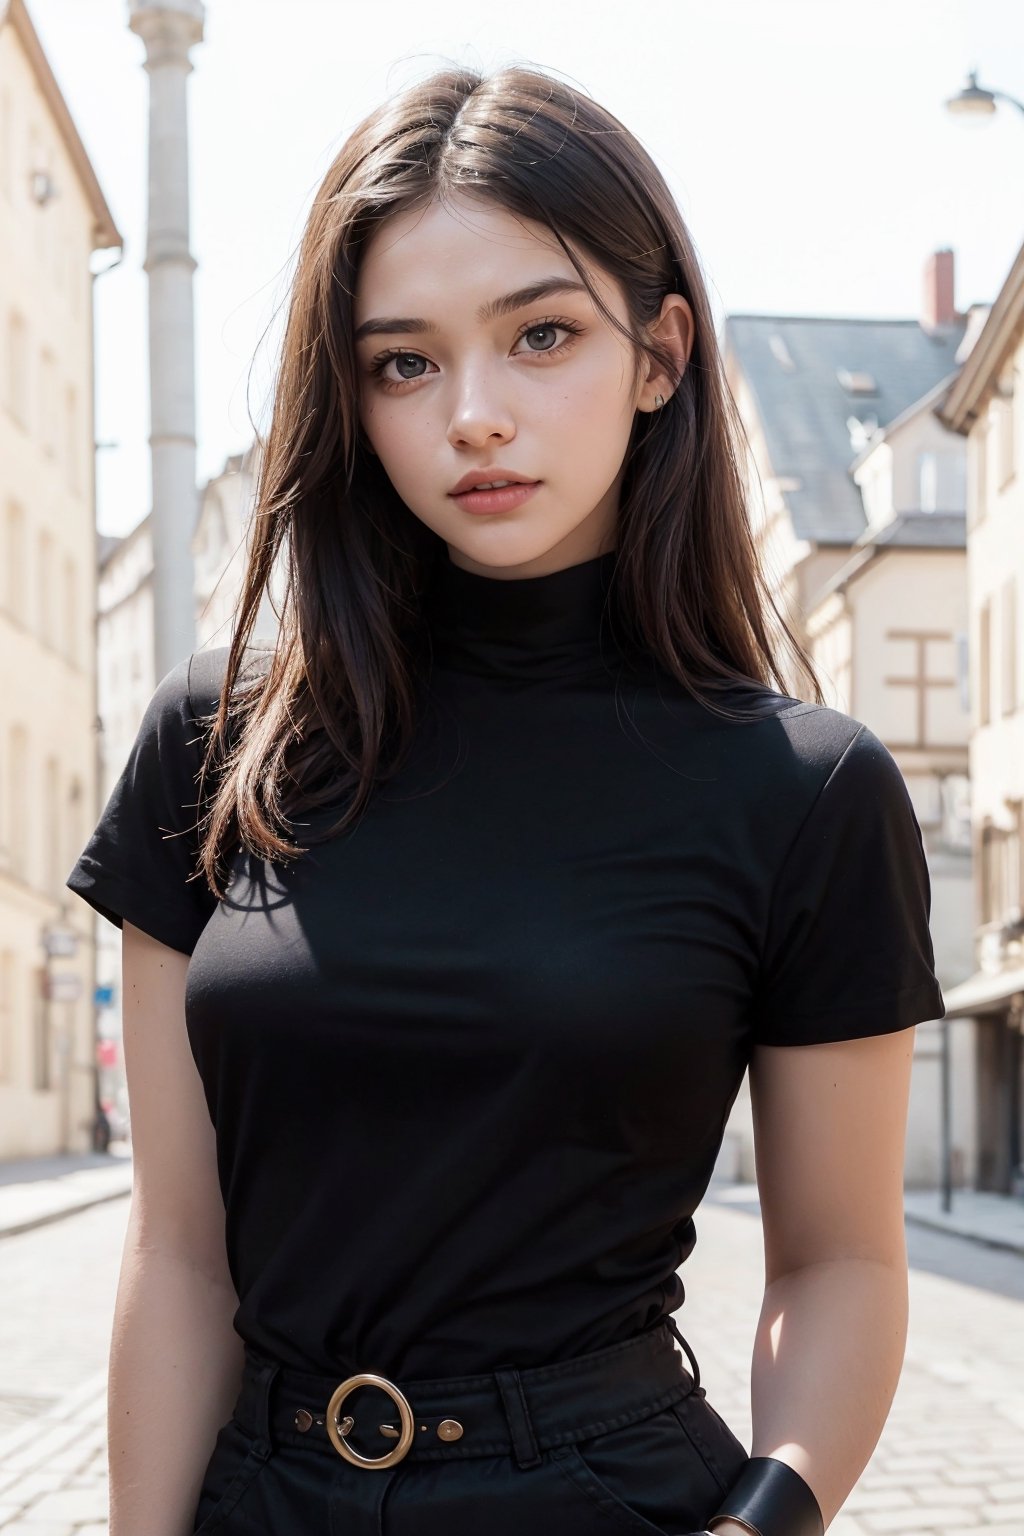 midjourney, niji,1 female,((( full_body))), cut off top of head, hand in frame
,1girls, Young beauty spirit ,Best face ever in the world, fully_dressed, random background, 1 girl, wearing best clothes,Realism,Germany Male,Portrait,Raw photo